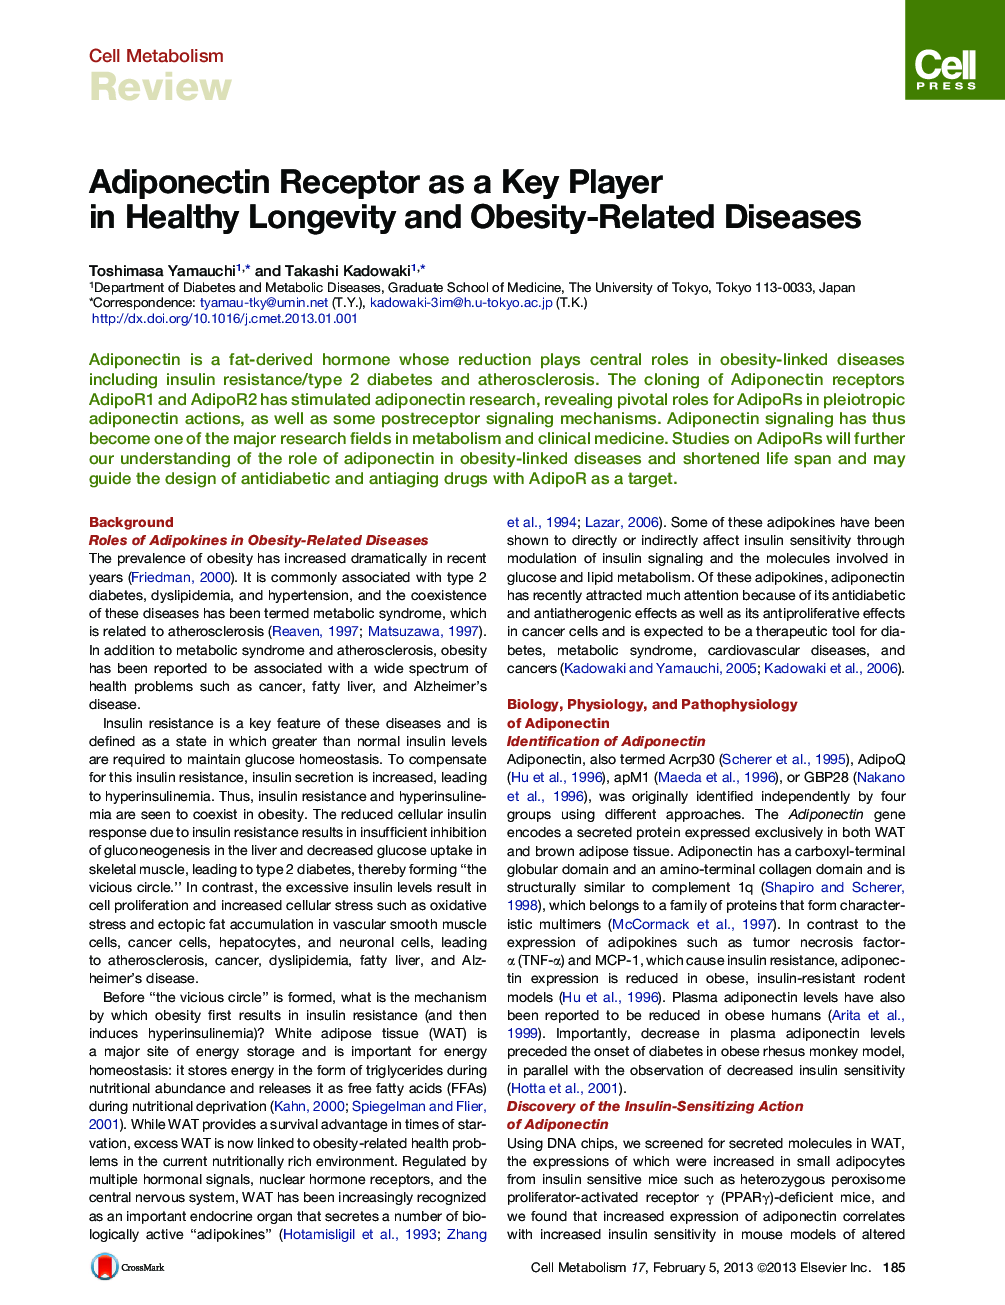 Adiponectin Receptor as a Key Player in Healthy Longevity and Obesity-Related Diseases